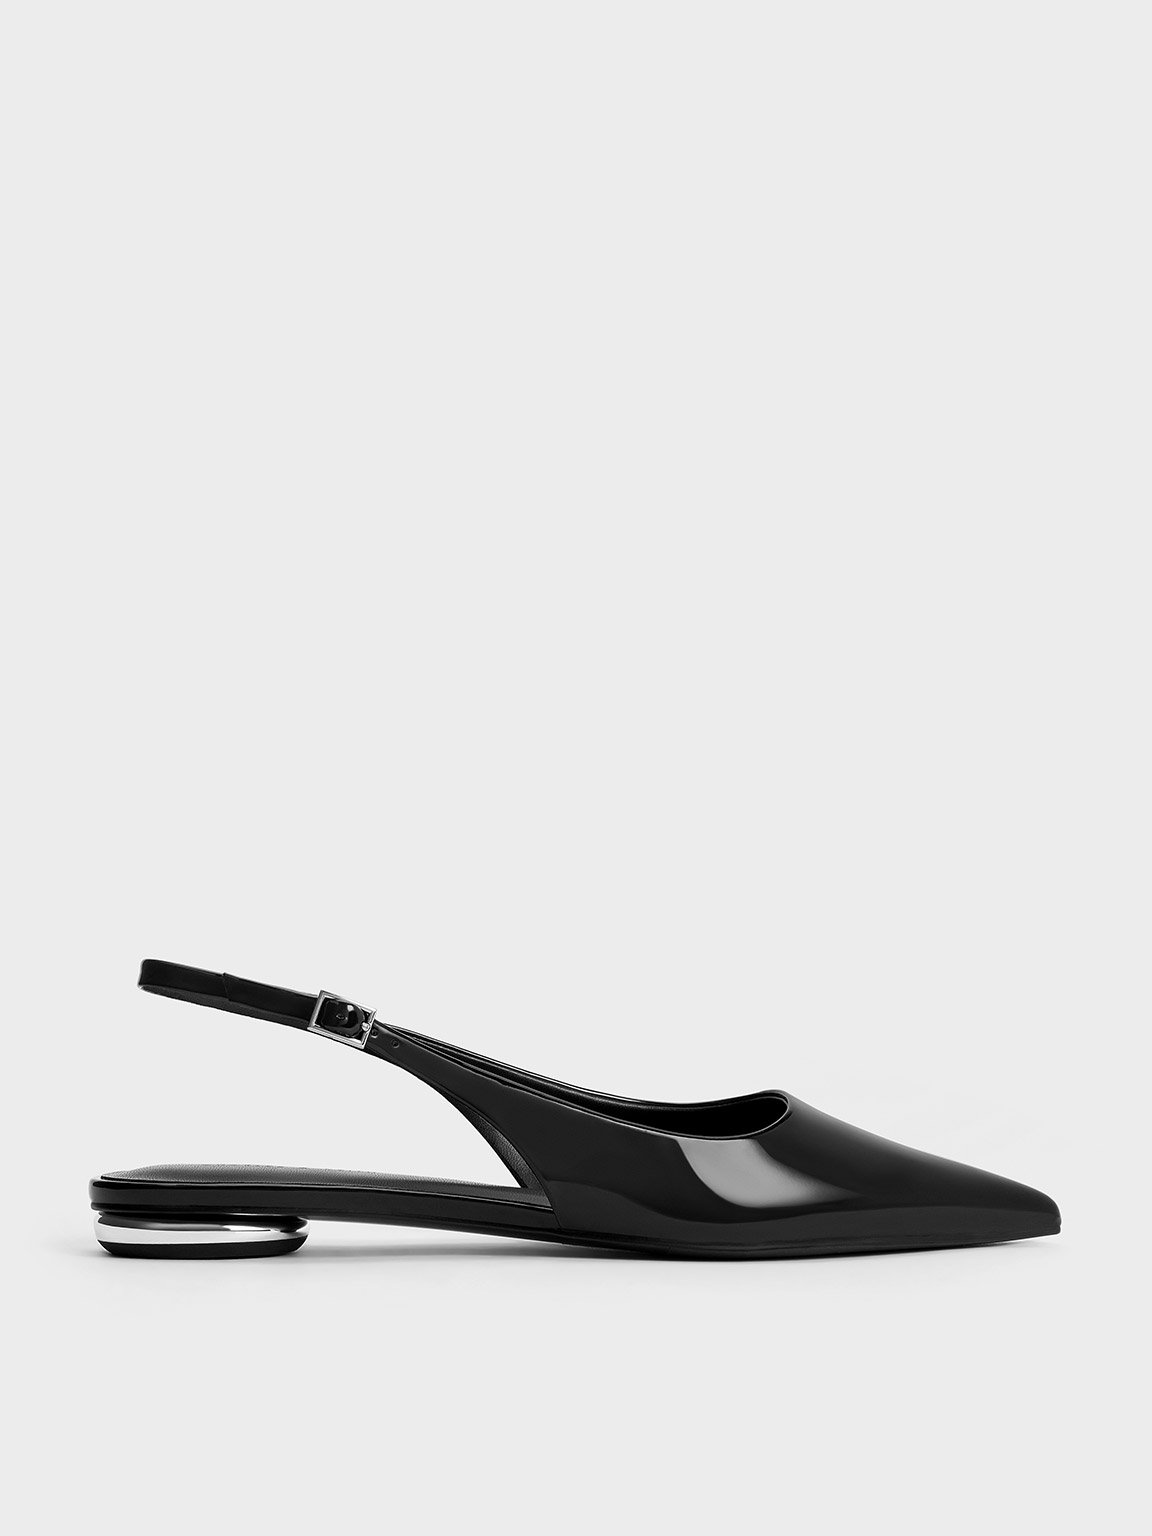 Black Patent Pointed-Toe Slingback Flats - CHARLES & KEITH US